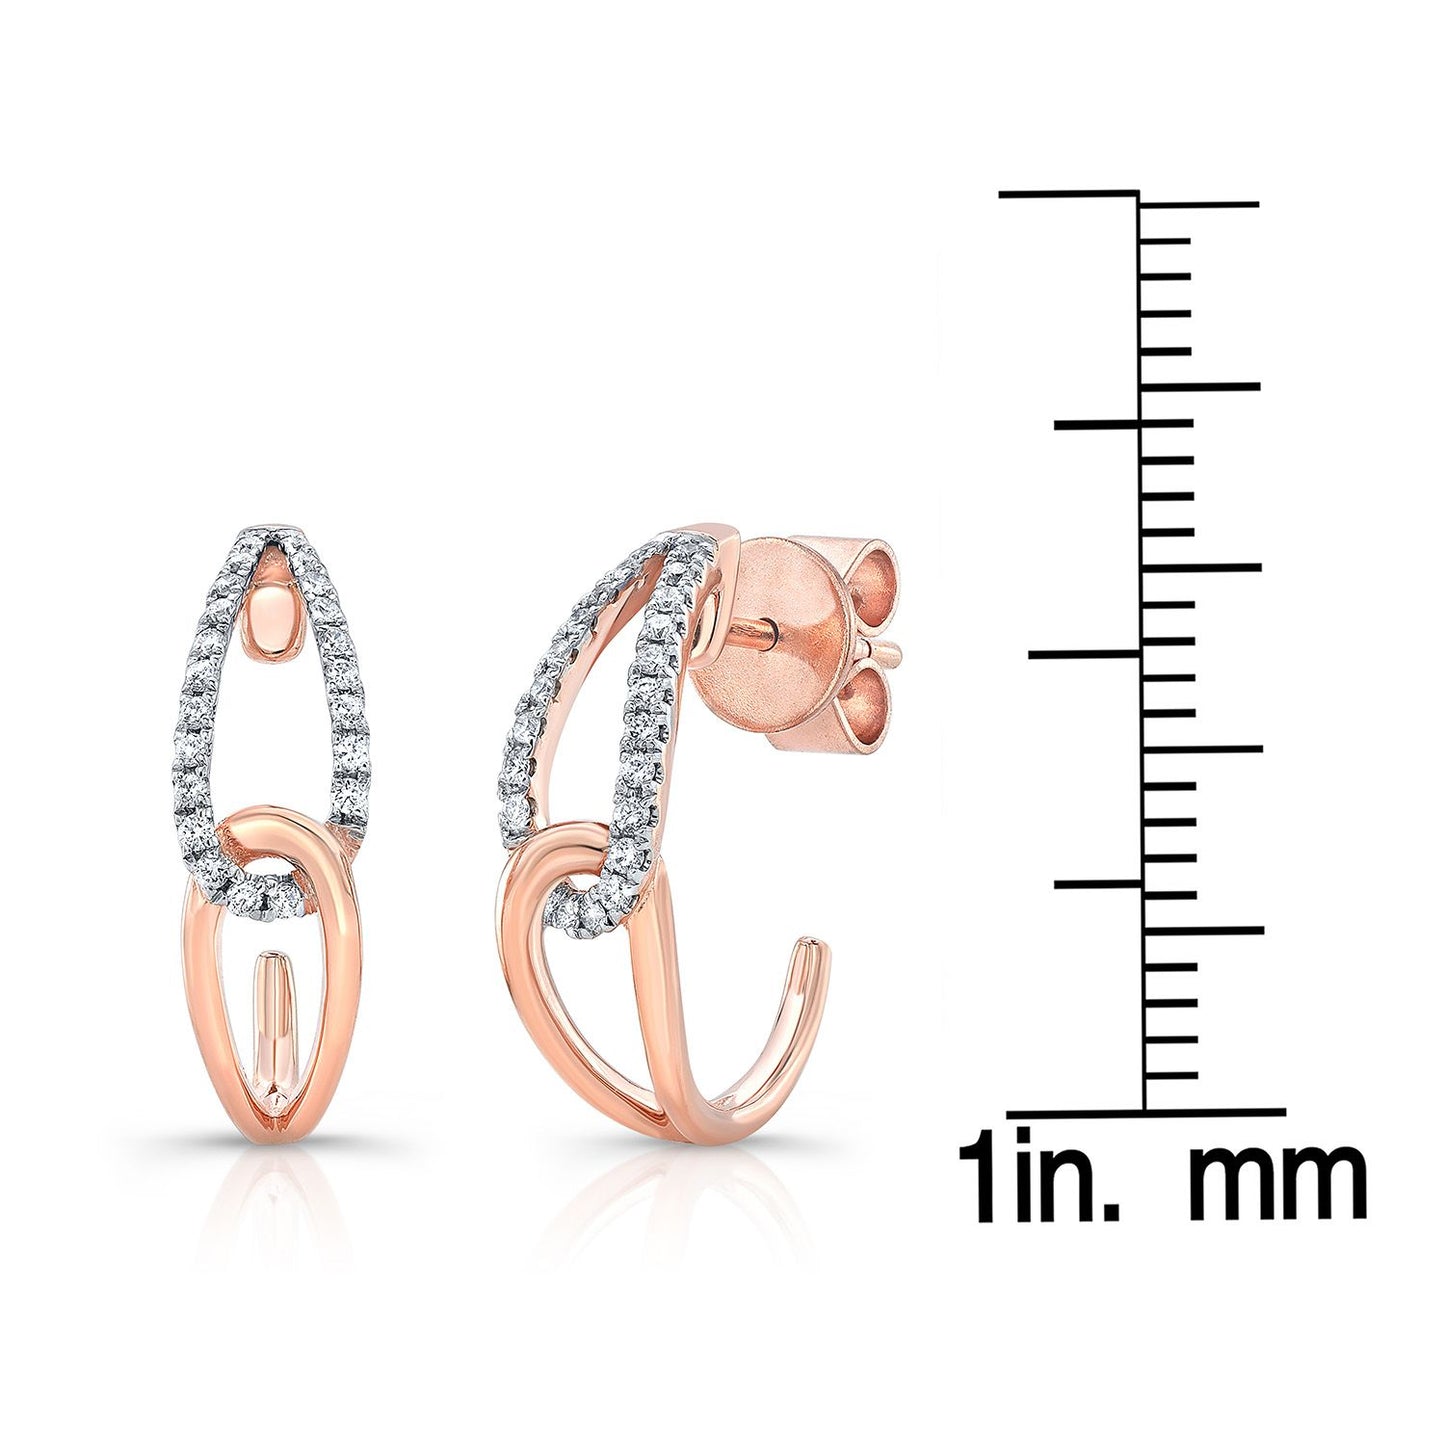 Diamond Pave And High Polish Teardrop Interlink Earrings In 14k Rose Gold